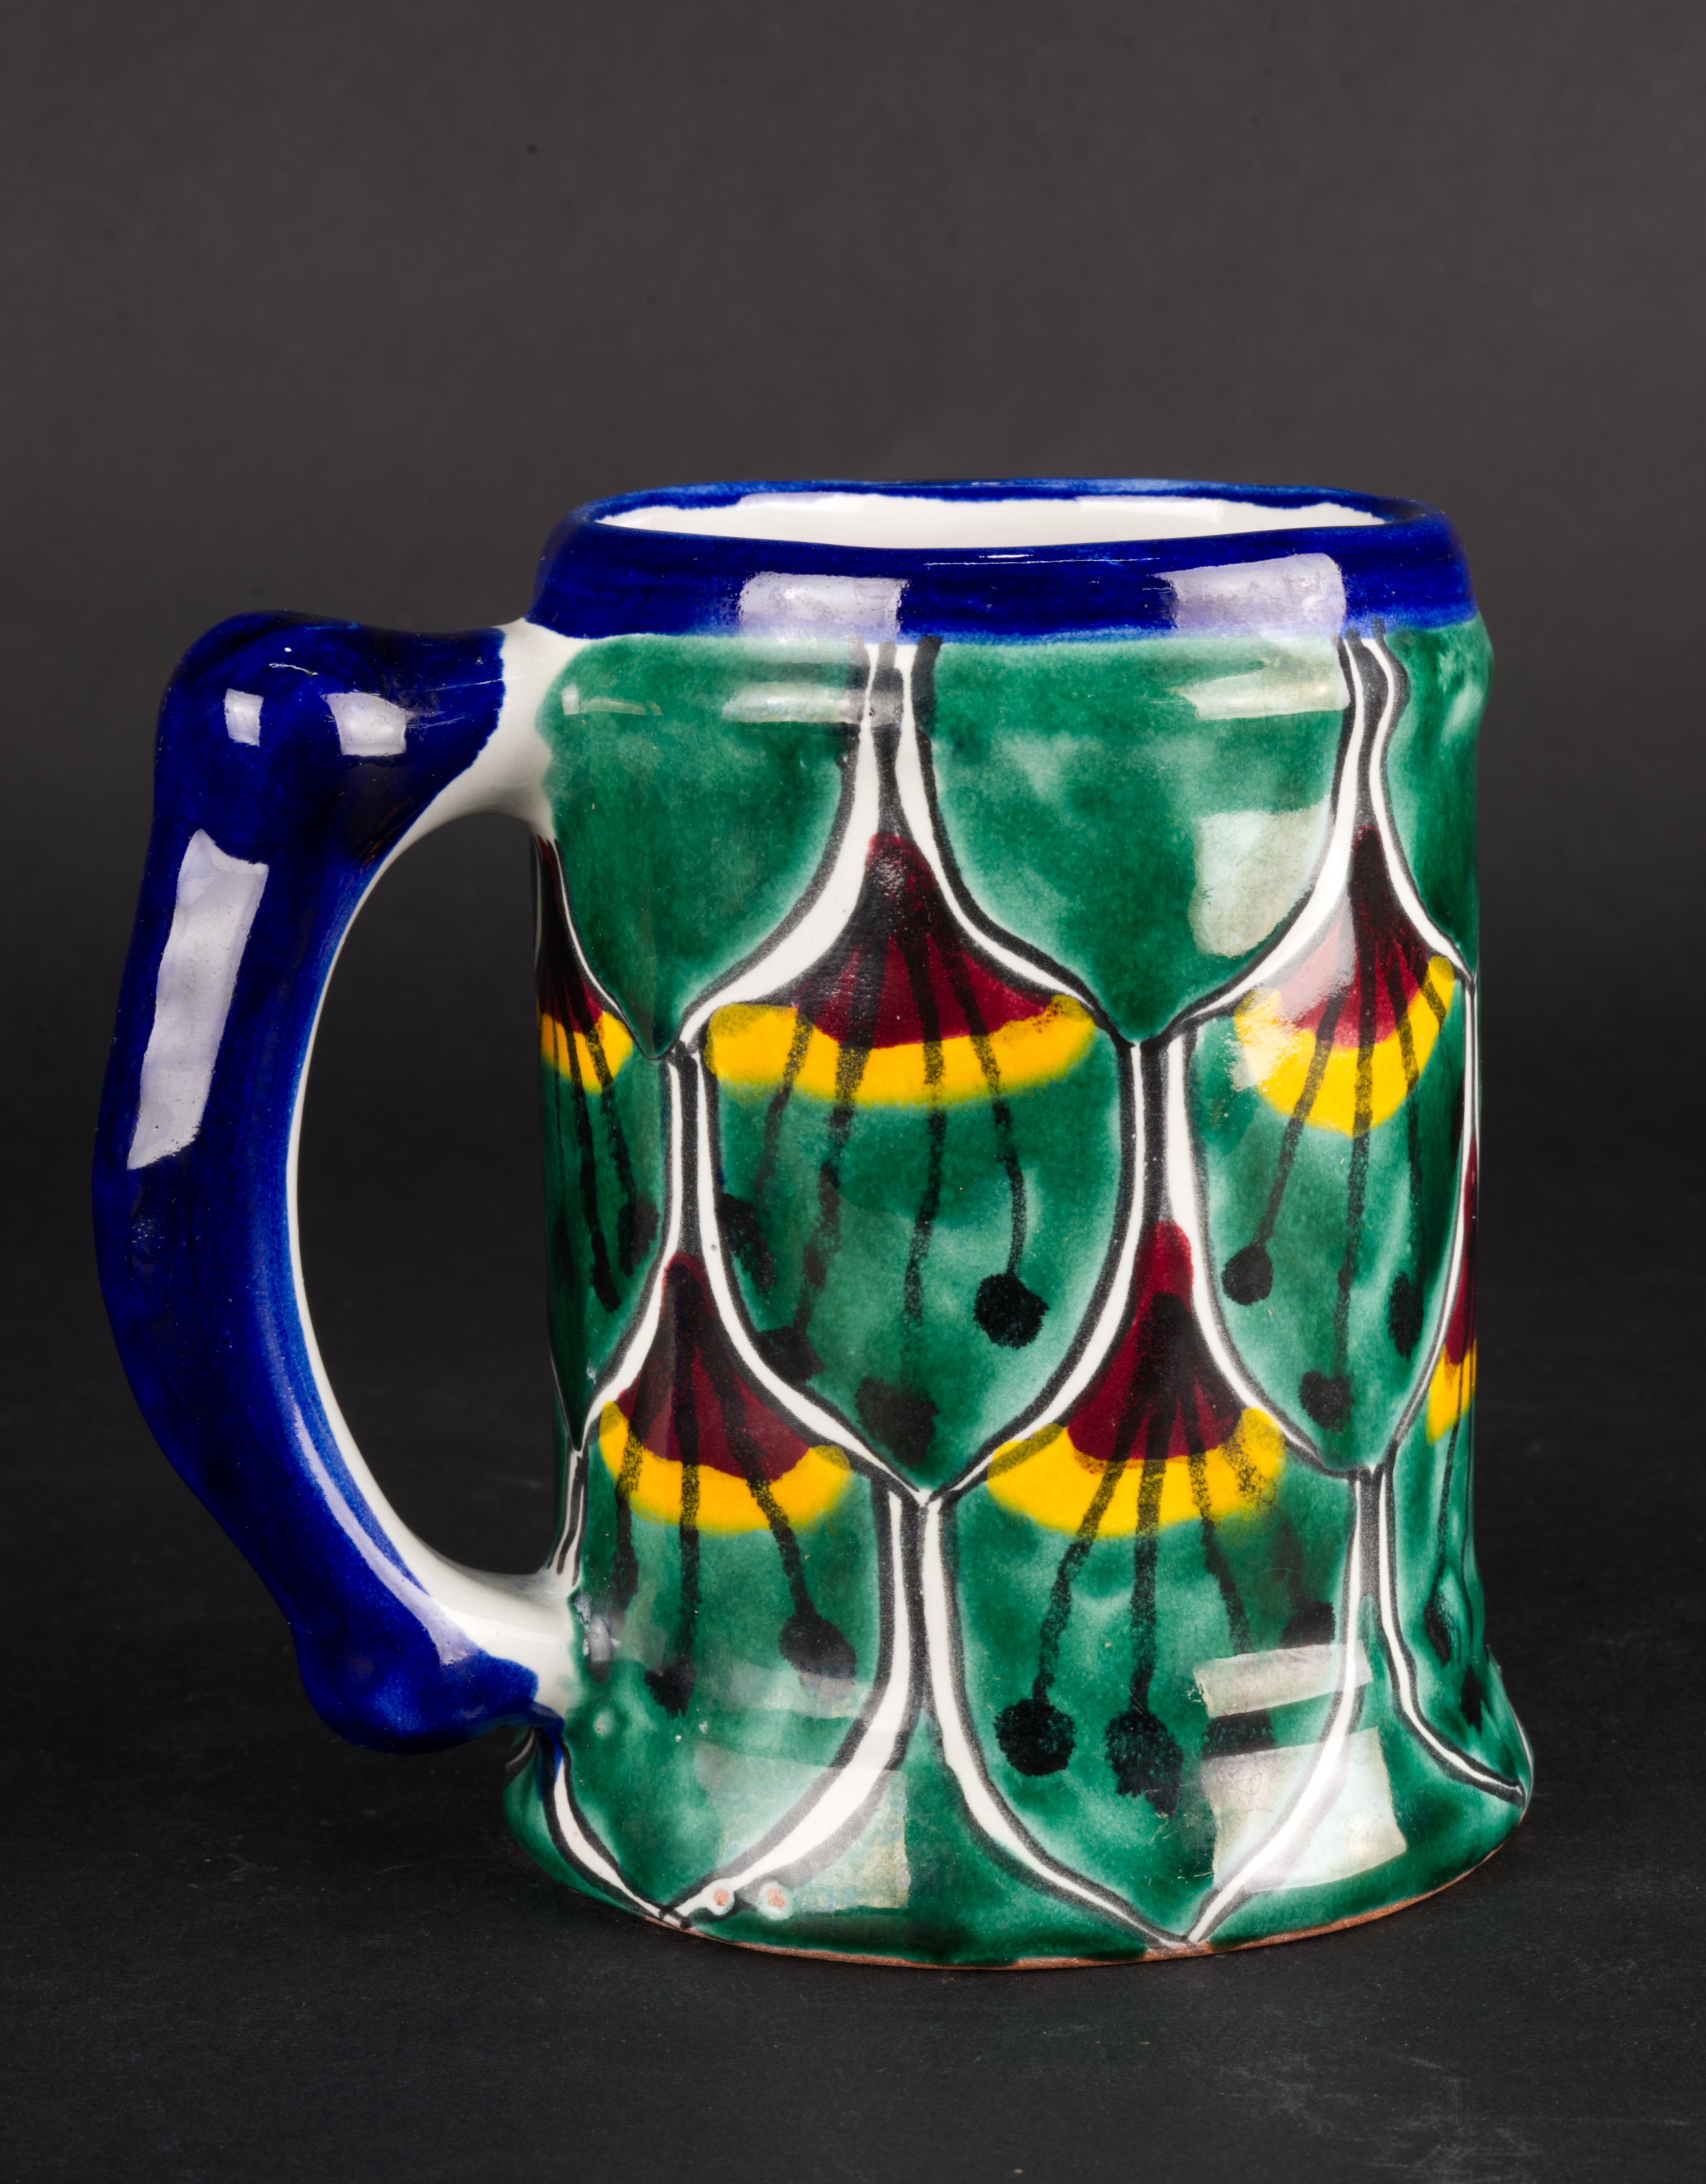 
Vintage oversized mug or stein was handmade by artisans in Talavera, Mexico. The mug is decorated with traditional Peacock design in deep green and blue with dark red and bright orange accents; the handle and rim are accented in solid blue. Inner